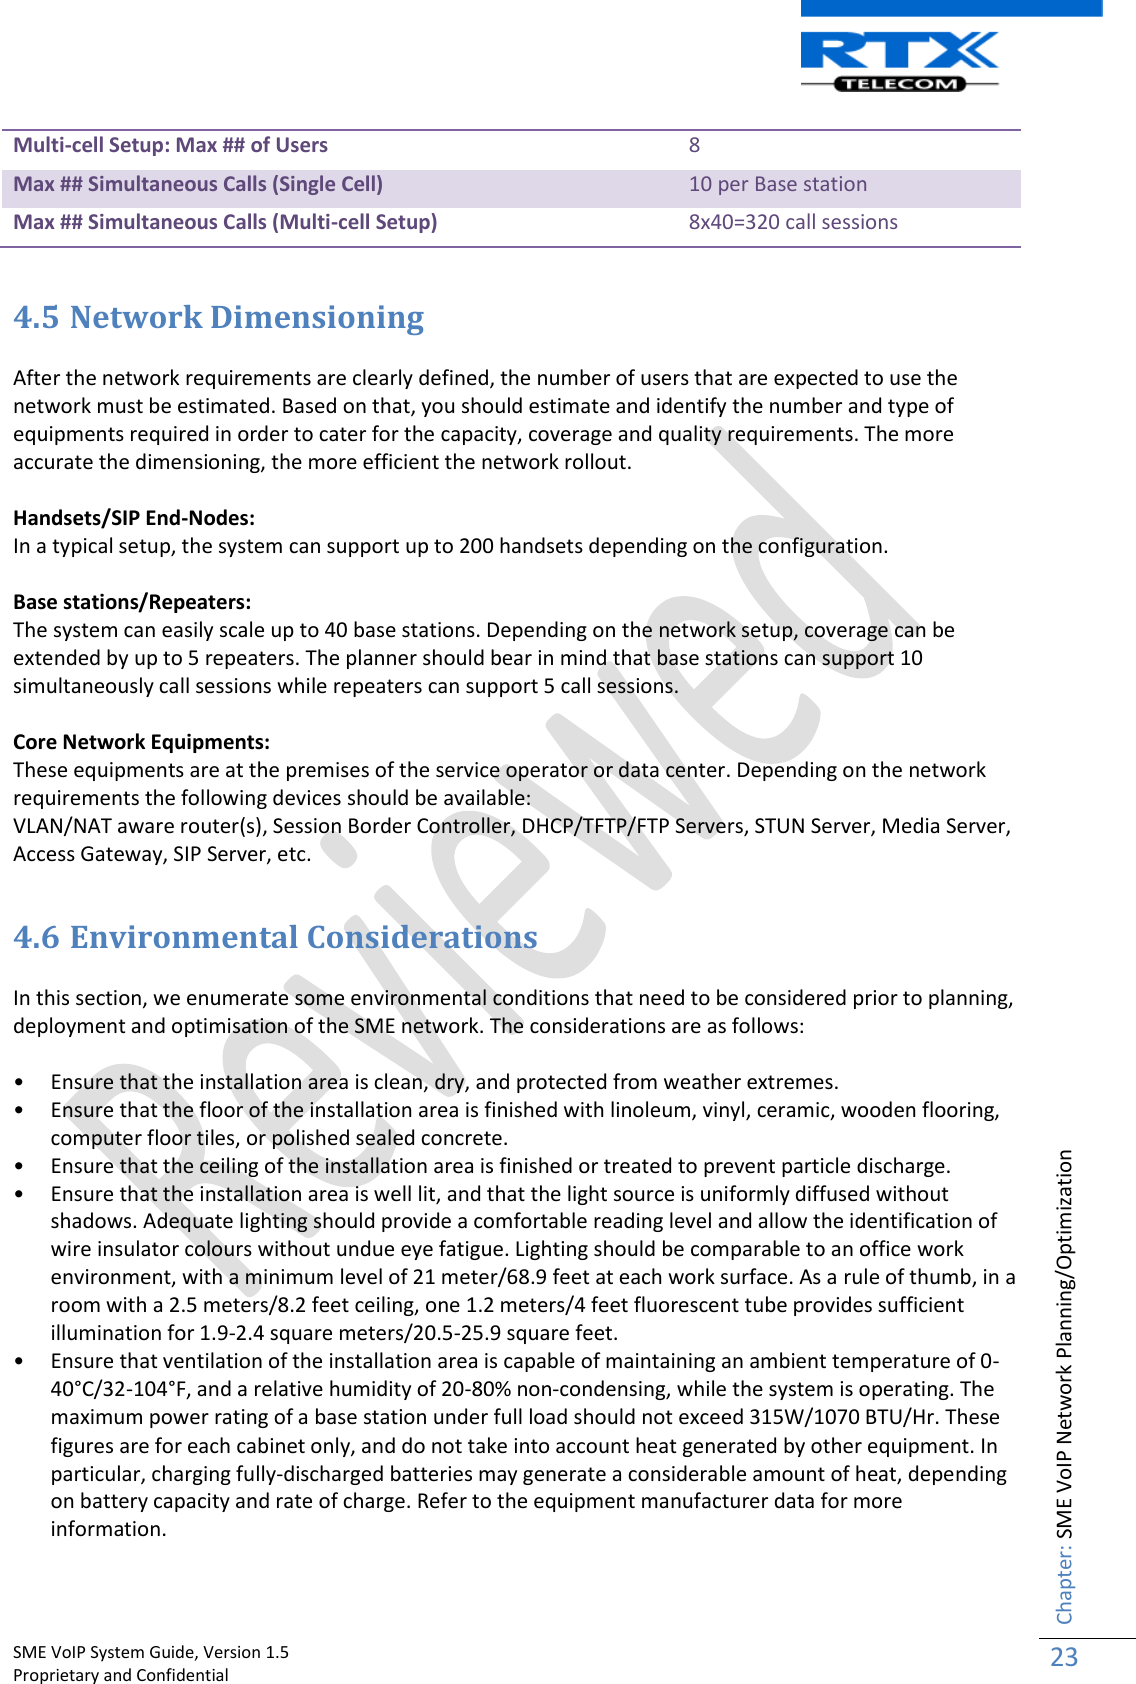    SME VoIP System Guide, Version 1.5                                                                                                                                                          Proprietary and Confidential    Chapter: SME VoIP Network Planning/Optimization 23  Multi-cell Setup: Max ## of Users 8 Max ## Simultaneous Calls (Single Cell) 10 per Base station Max ## Simultaneous Calls (Multi-cell Setup) 8x40=320 call sessions  4.5 Network Dimensioning   After the network requirements are clearly defined, the number of users that are expected to use the network must be estimated. Based on that, you should estimate and identify the number and type of equipments required in order to cater for the capacity, coverage and quality requirements. The more accurate the dimensioning, the more efficient the network rollout.  Handsets/SIP End-Nodes: In a typical setup, the system can support up to 200 handsets depending on the configuration.  Base stations/Repeaters: The system can easily scale up to 40 base stations. Depending on the network setup, coverage can be extended by up to 5 repeaters. The planner should bear in mind that base stations can support 10 simultaneously call sessions while repeaters can support 5 call sessions.  Core Network Equipments: These equipments are at the premises of the service operator or data center. Depending on the network requirements the following devices should be available: VLAN/NAT aware router(s), Session Border Controller, DHCP/TFTP/FTP Servers, STUN Server, Media Server, Access Gateway, SIP Server, etc.  4.6 Environmental Considerations  In this section, we enumerate some environmental conditions that need to be considered prior to planning, deployment and optimisation of the SME network. The considerations are as follows:  • Ensure that the installation area is clean, dry, and protected from weather extremes. • Ensure that the floor of the installation area is finished with linoleum, vinyl, ceramic, wooden flooring, computer floor tiles, or polished sealed concrete. • Ensure that the ceiling of the installation area is finished or treated to prevent particle discharge. • Ensure that the installation area is well lit, and that the light source is uniformly diffused without shadows. Adequate lighting should provide a comfortable reading level and allow the identification of wire insulator colours without undue eye fatigue. Lighting should be comparable to an office work environment, with a minimum level of 21 meter/68.9 feet at each work surface. As a rule of thumb, in a room with a 2.5 meters/8.2 feet ceiling, one 1.2 meters/4 feet fluorescent tube provides sufficient illumination for 1.9-2.4 square meters/20.5-25.9 square feet. • Ensure that ventilation of the installation area is capable of maintaining an ambient temperature of 0-40°C/32-104°F, and a relative humidity of 20-80% non-condensing, while the system is operating. The maximum power rating of a base station under full load should not exceed 315W/1070 BTU/Hr. These figures are for each cabinet only, and do not take into account heat generated by other equipment. In particular, charging fully-discharged batteries may generate a considerable amount of heat, depending on battery capacity and rate of charge. Refer to the equipment manufacturer data for more information. 